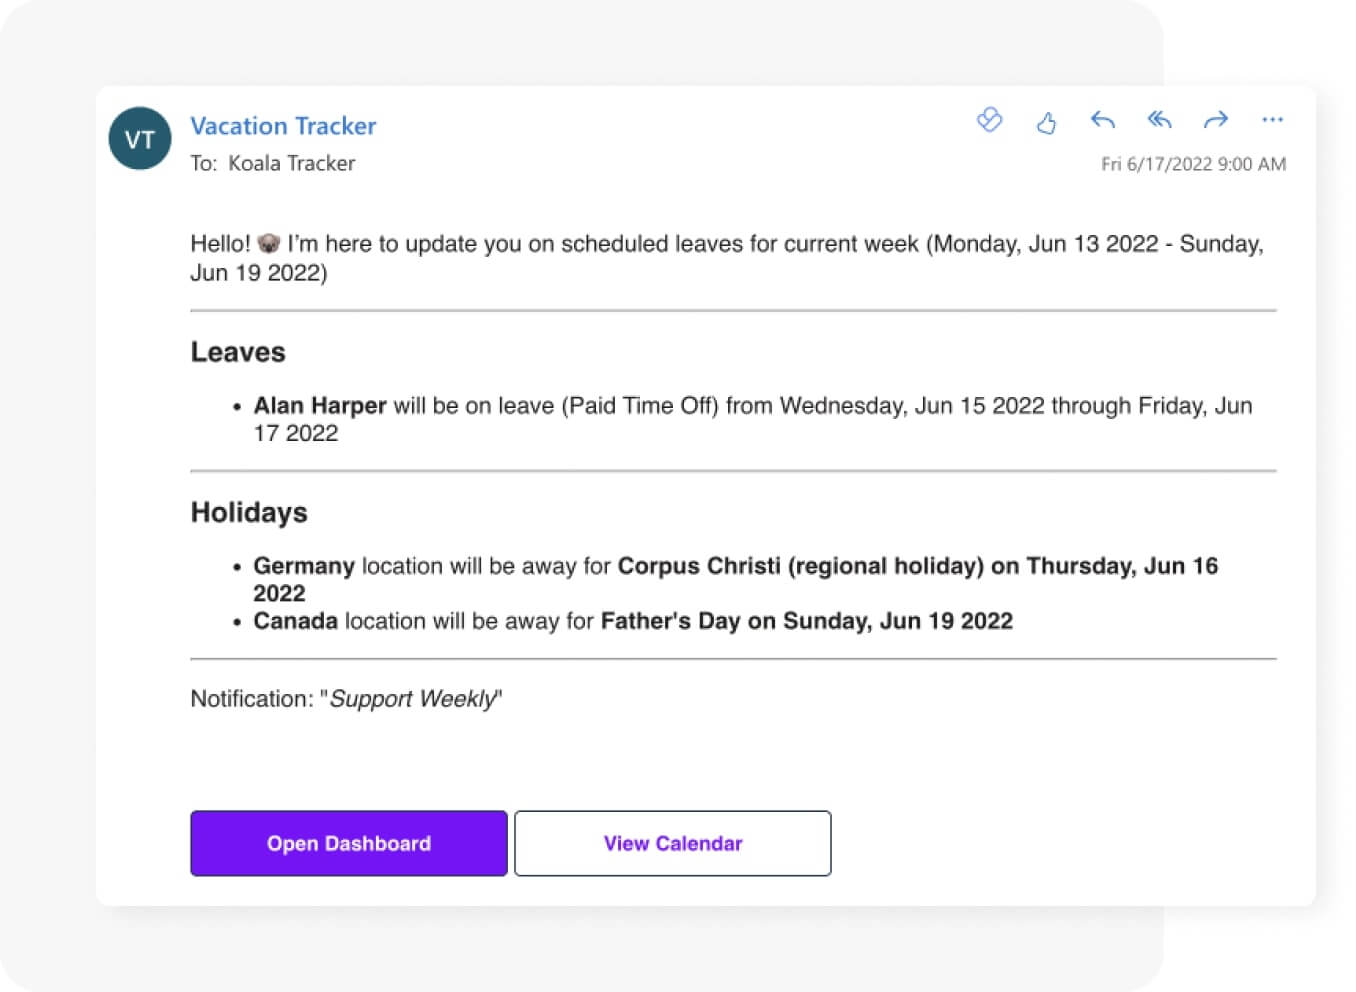 Get leave updates directly in your inbox